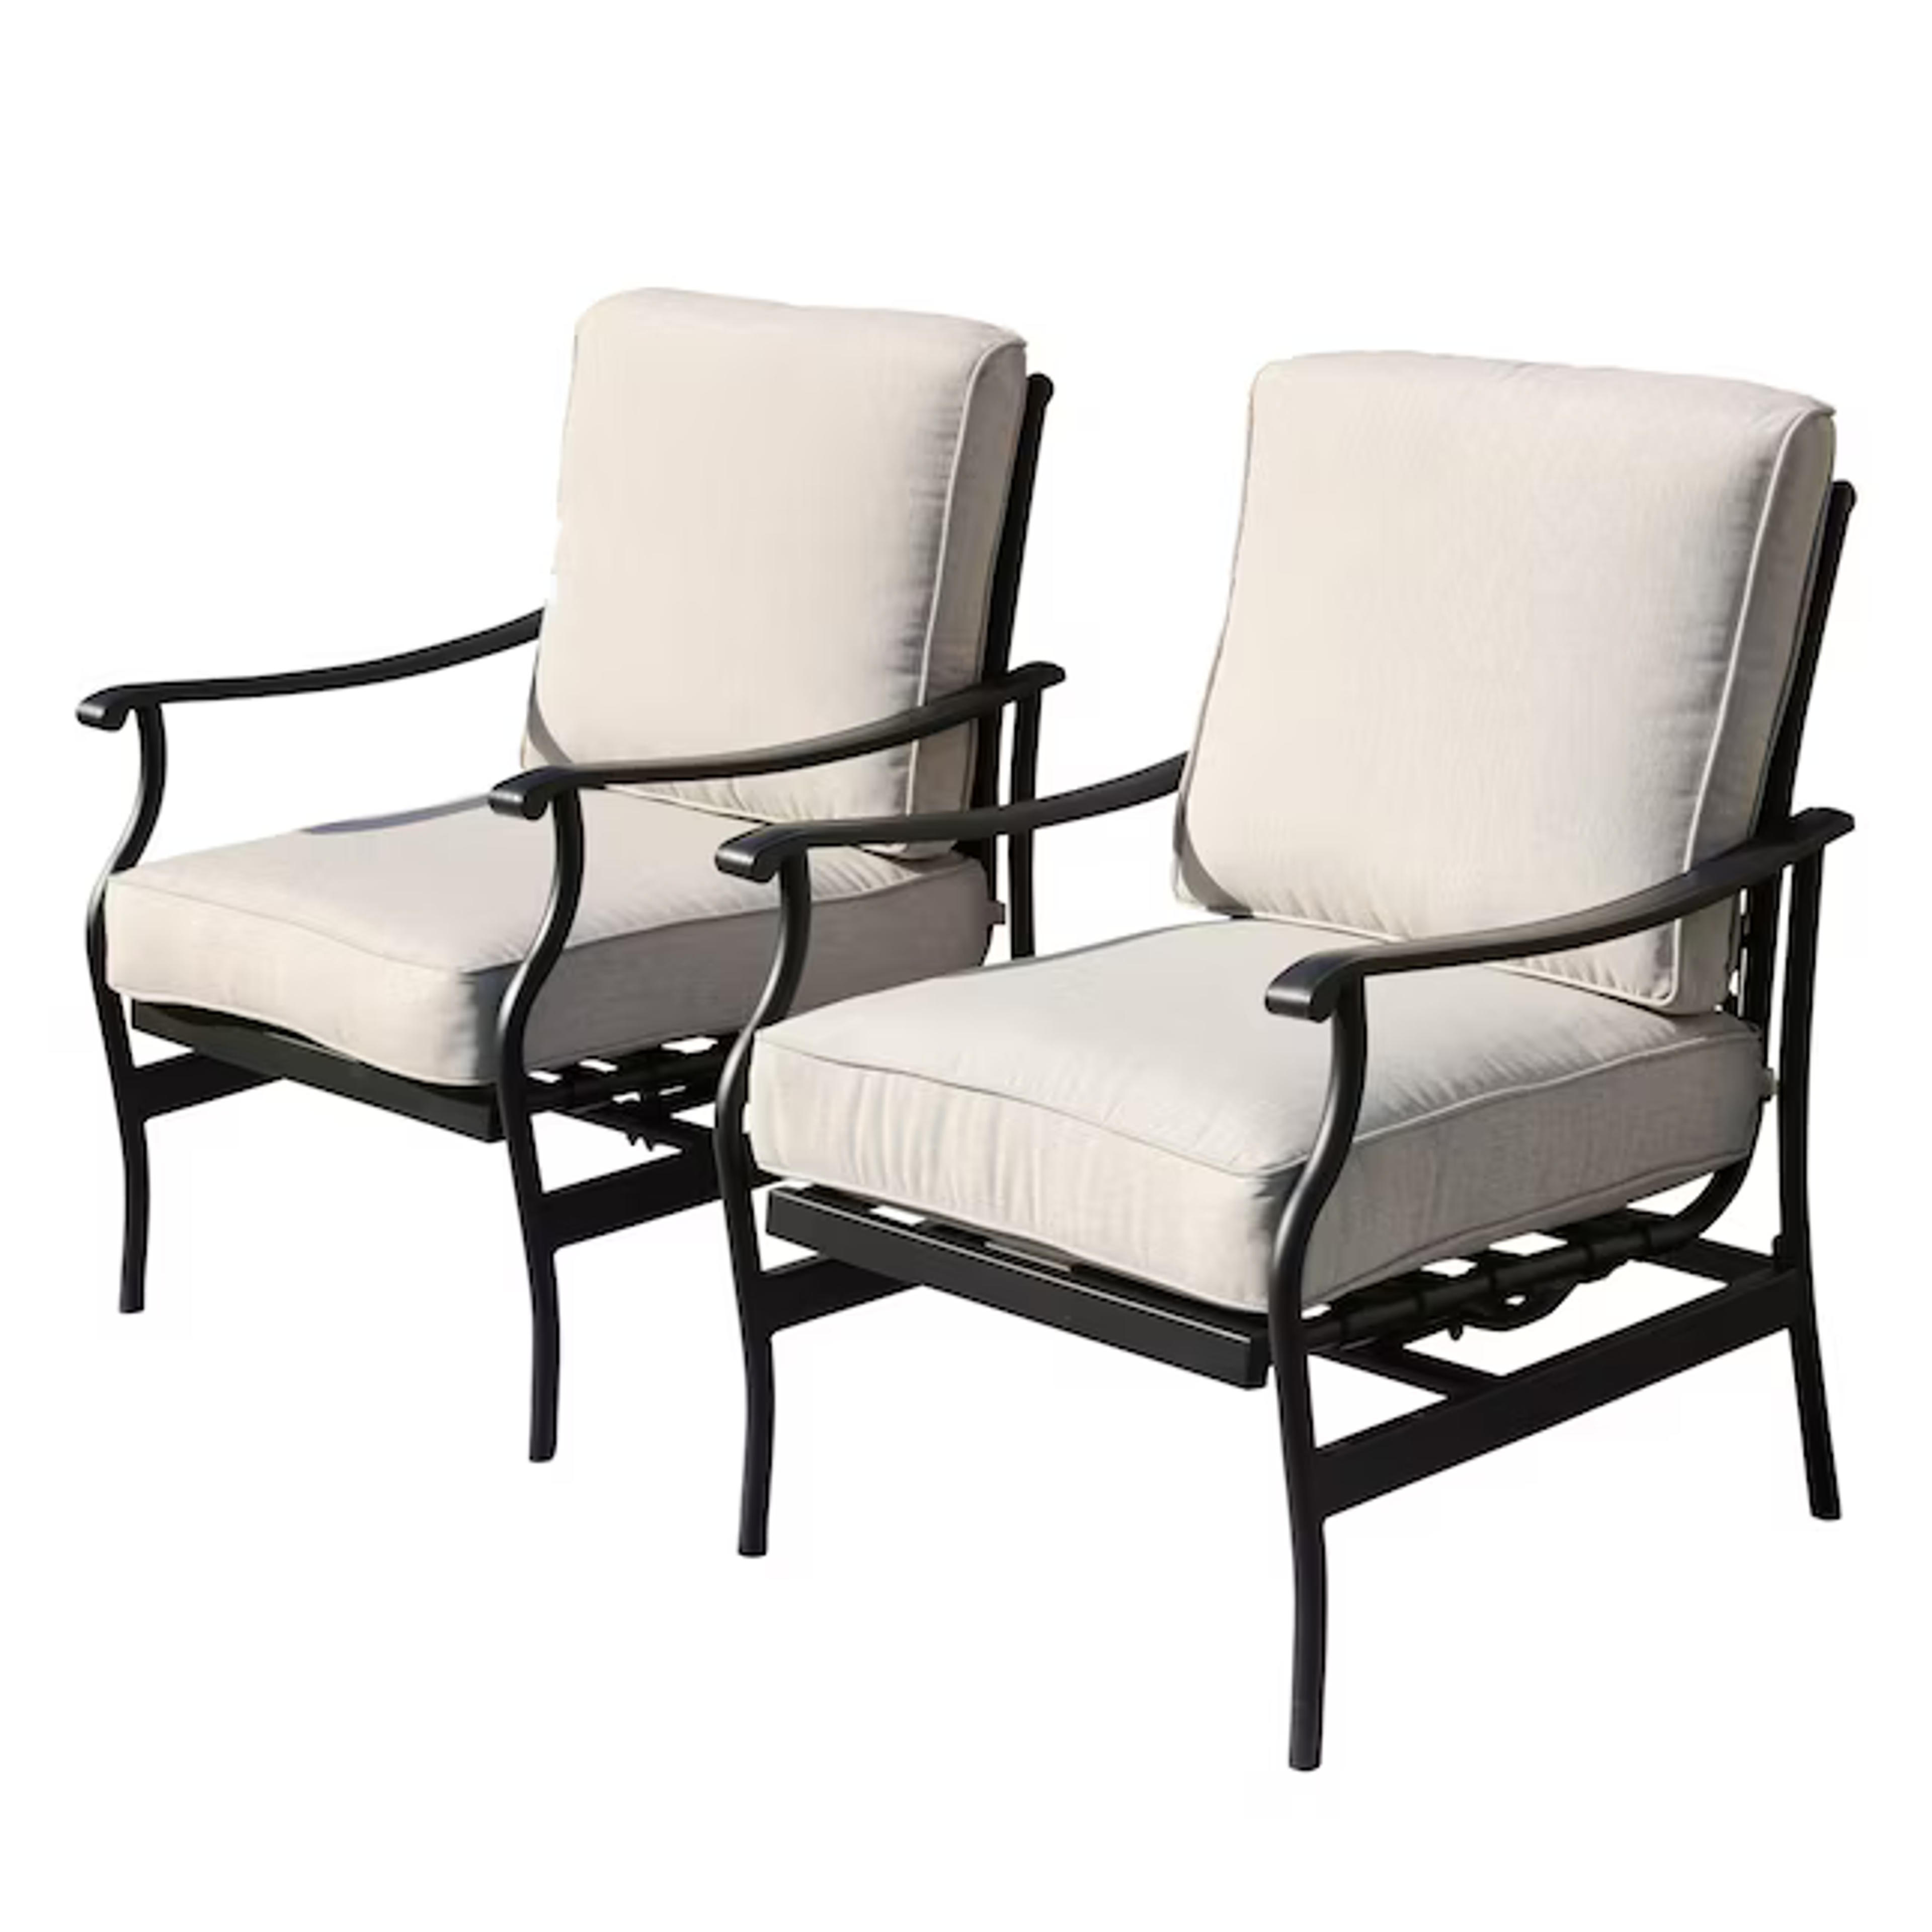 lowes.com/pd/Top-Home-Space-Top-Home-Space-2-Pcs-Patio-Chairs-Outdoor-Dining-Chairs-Rocking-Chairs-Patio-Conversation-Set-Metal-Furniture-Bistro-Set-with-Beige-Cushions/5001504391